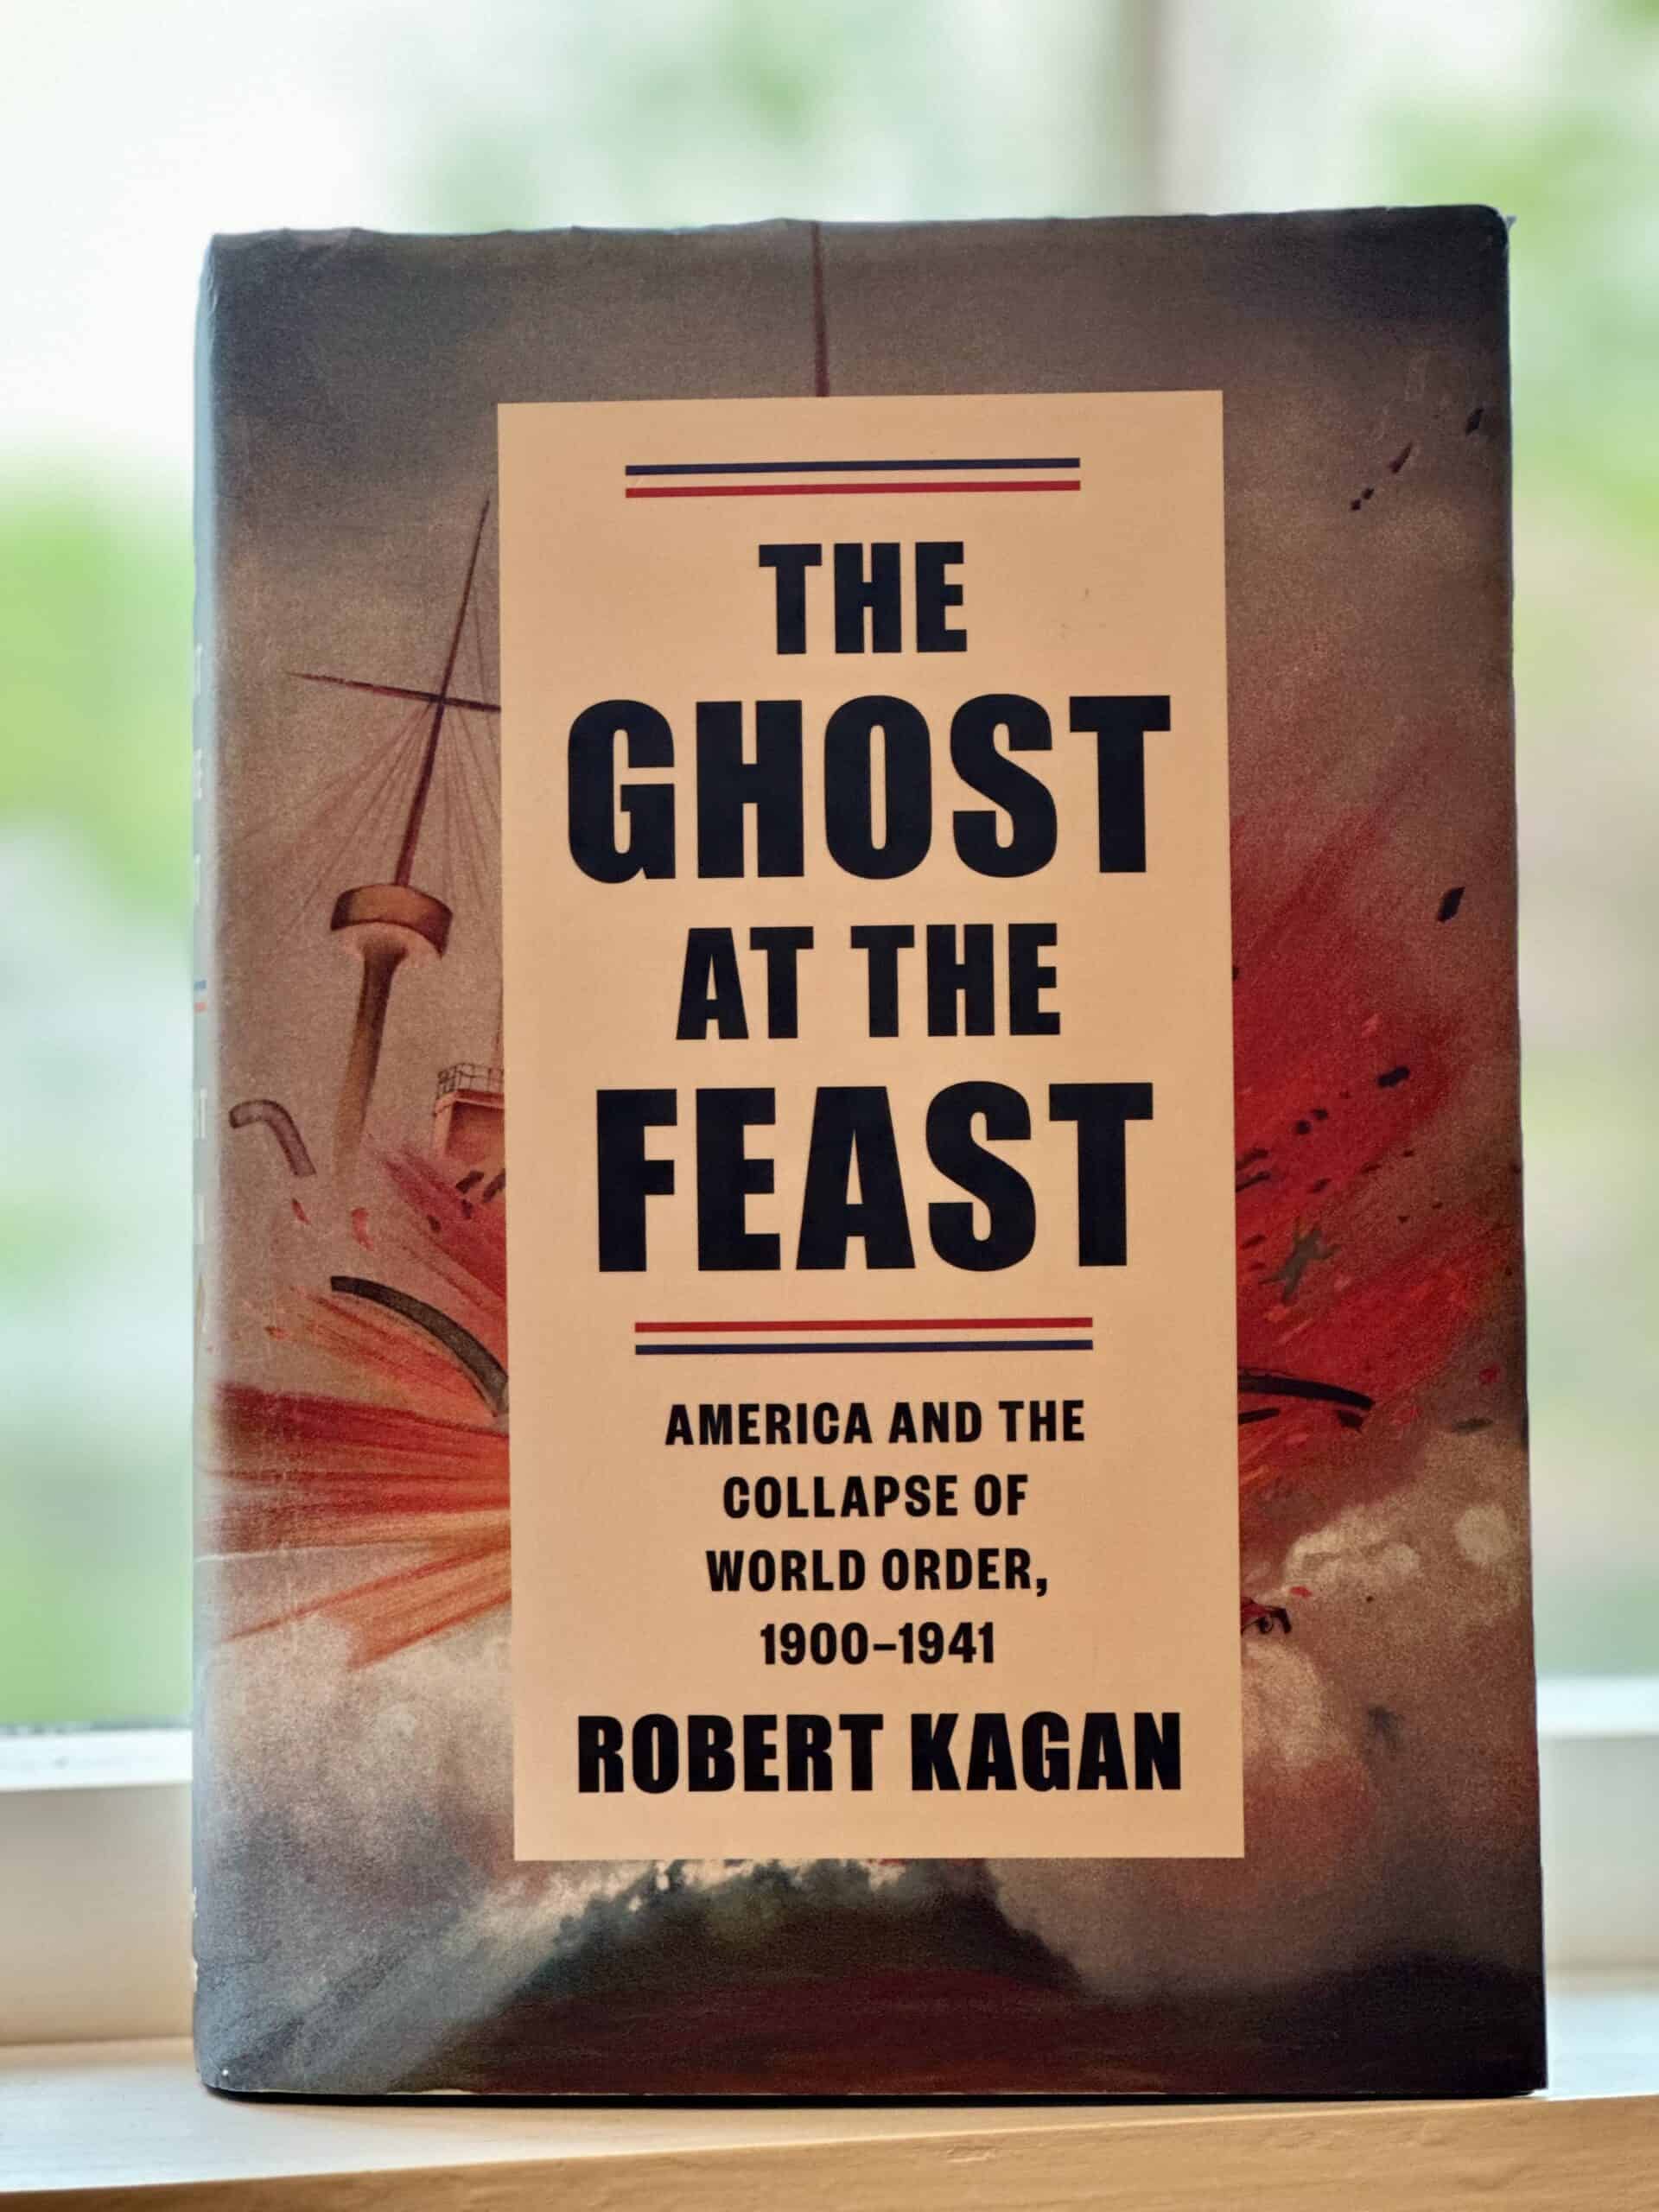 The ghost at the feast book by Robert Kagan